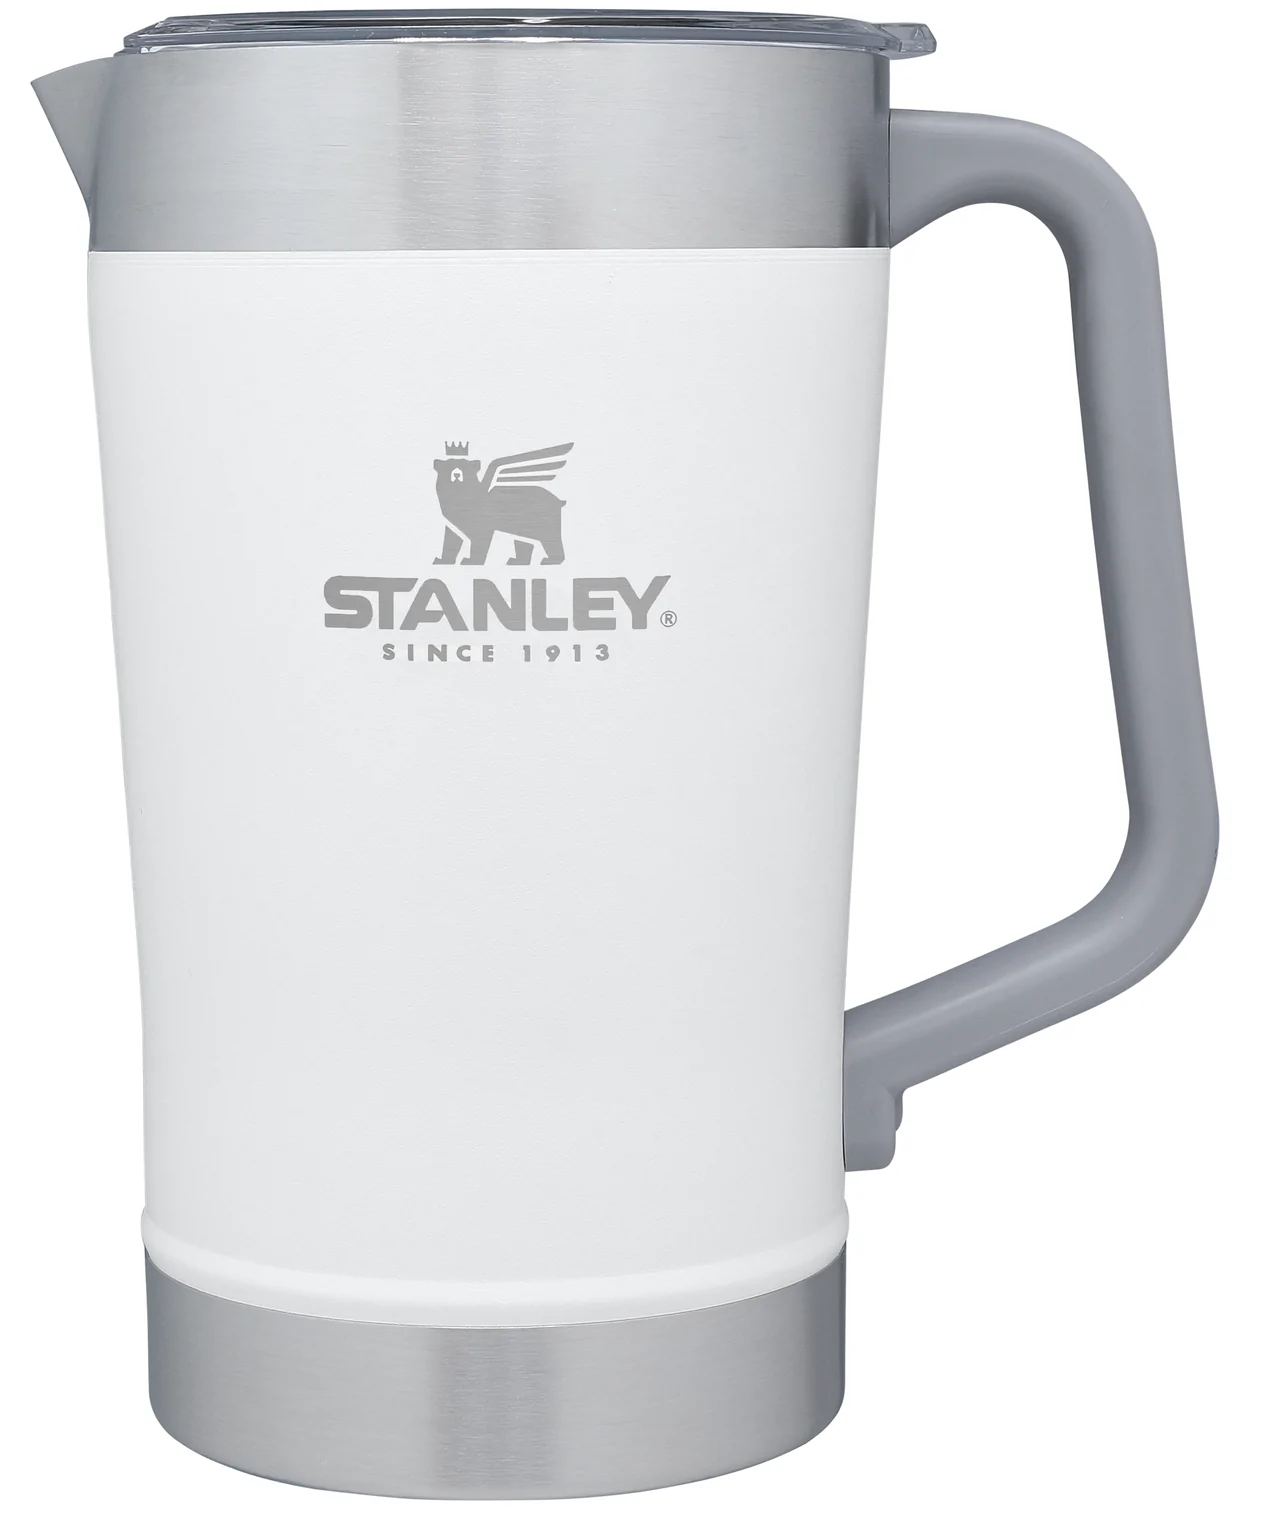 Stanley classic Stay Chill pitcher set